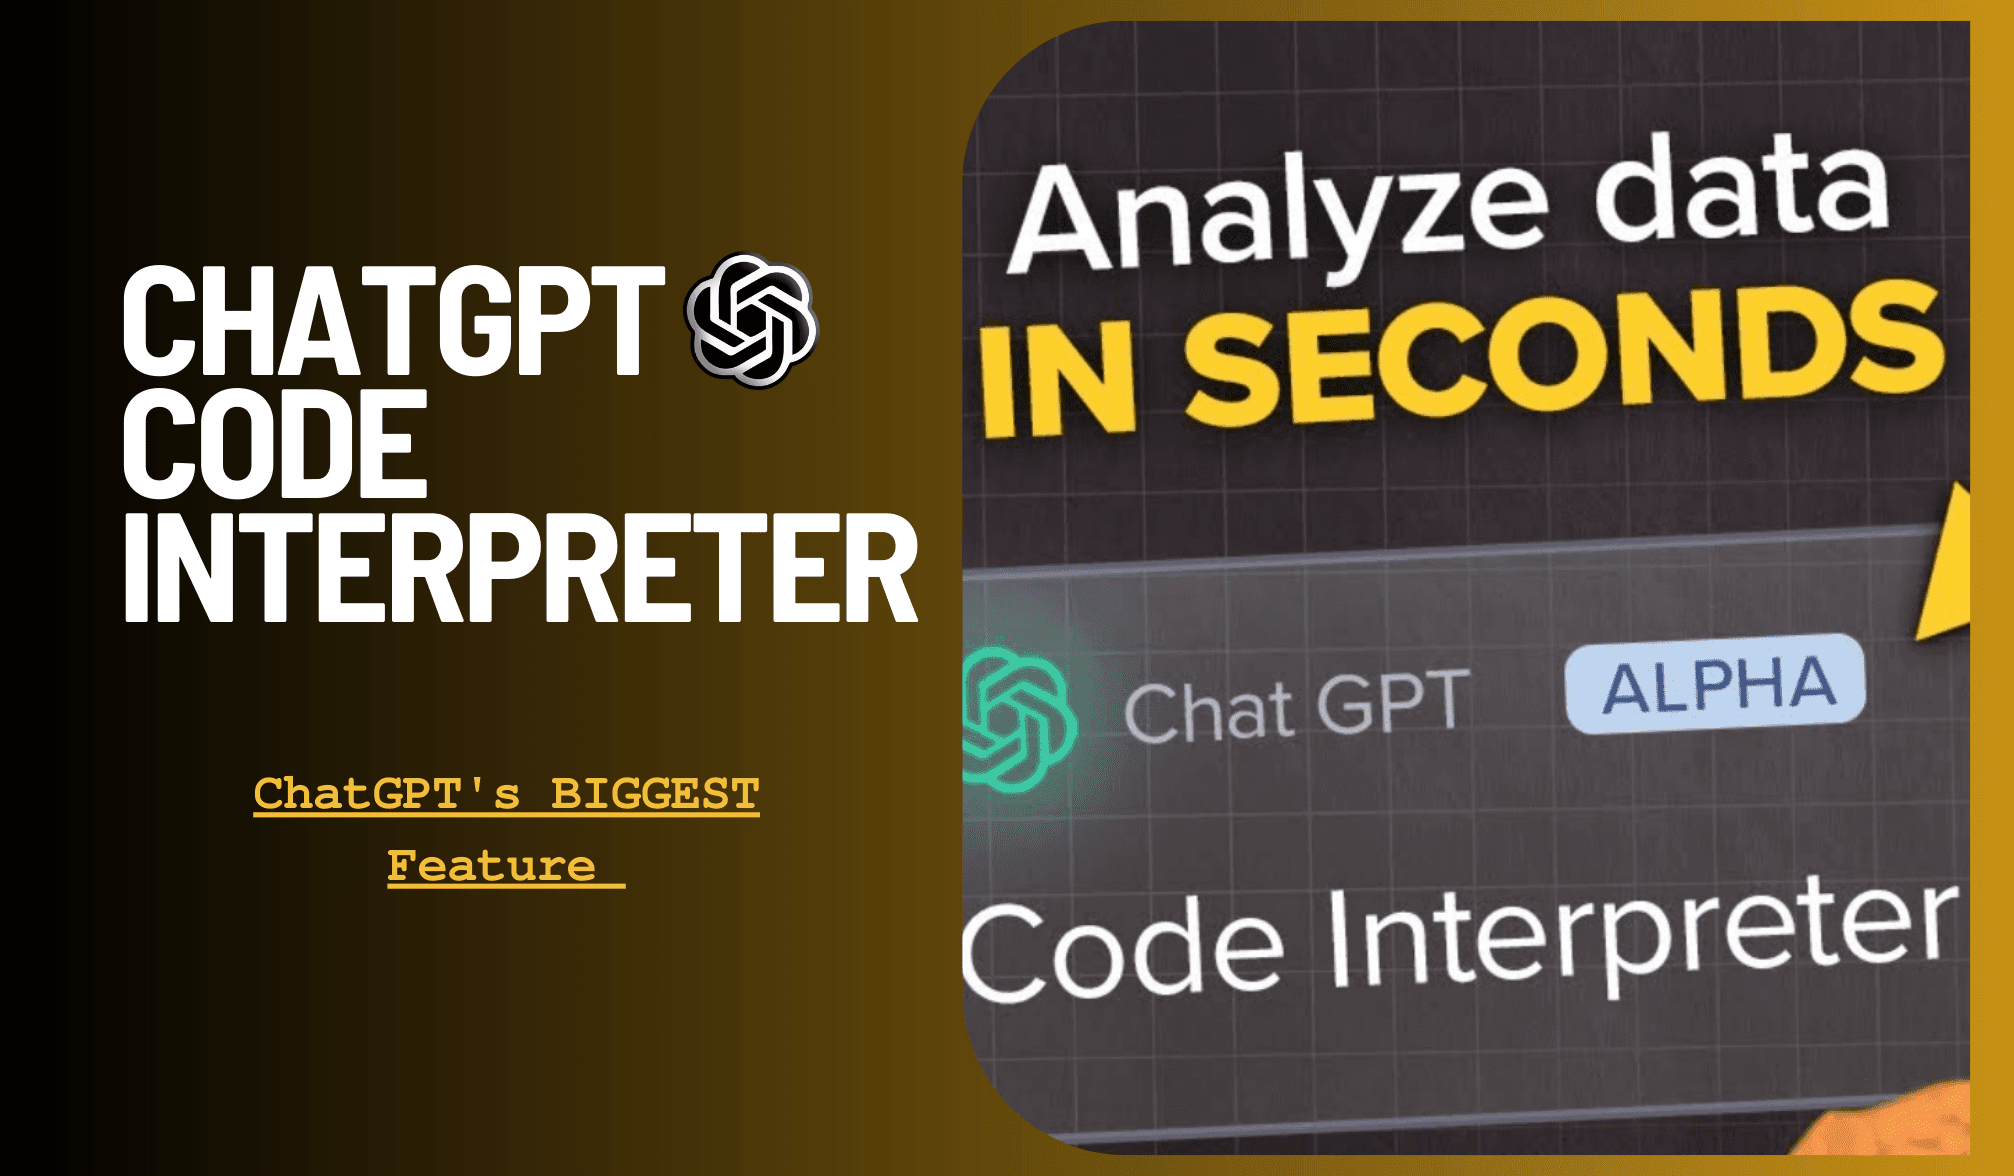 How to Use ChatGPT Code Interpreter